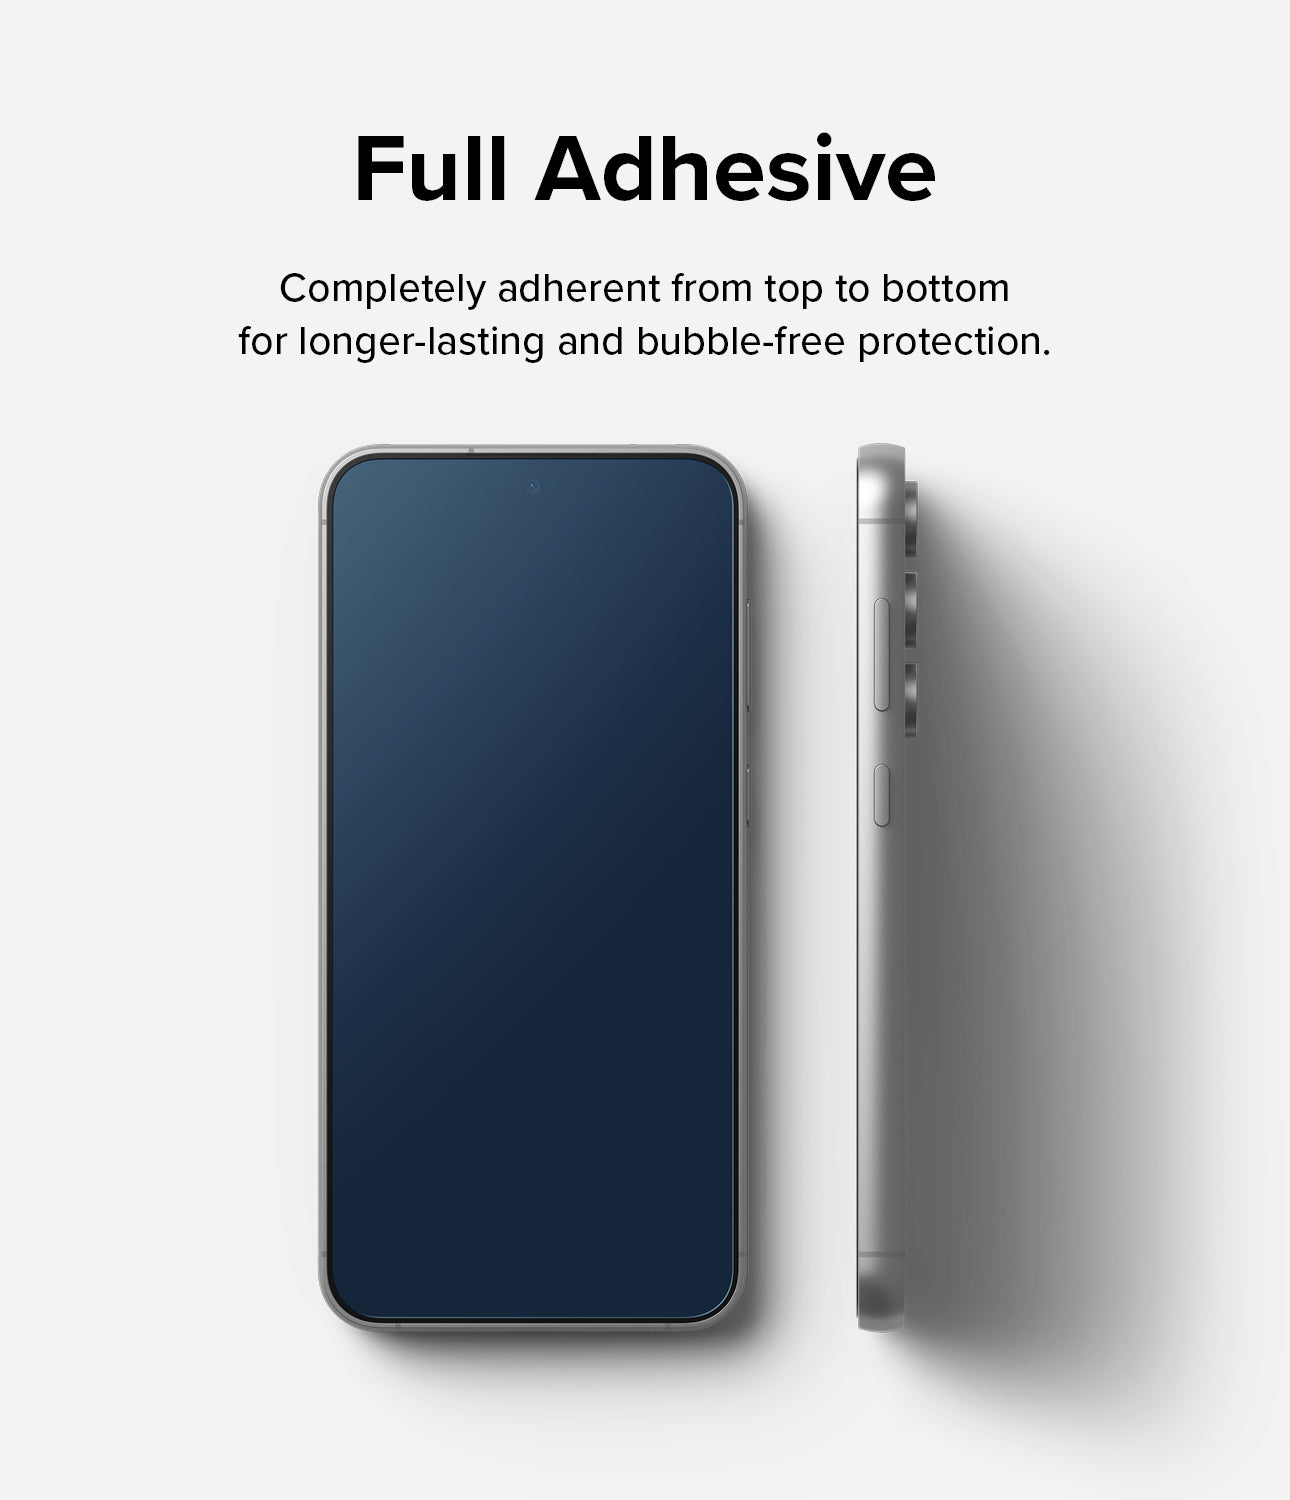 Galaxy S23 FE Screen Protector | Full Cover Glass - 2 Pack - Full Adhesive. Completely adherent from top to bottom for longer-lasting and bubble-free protection.